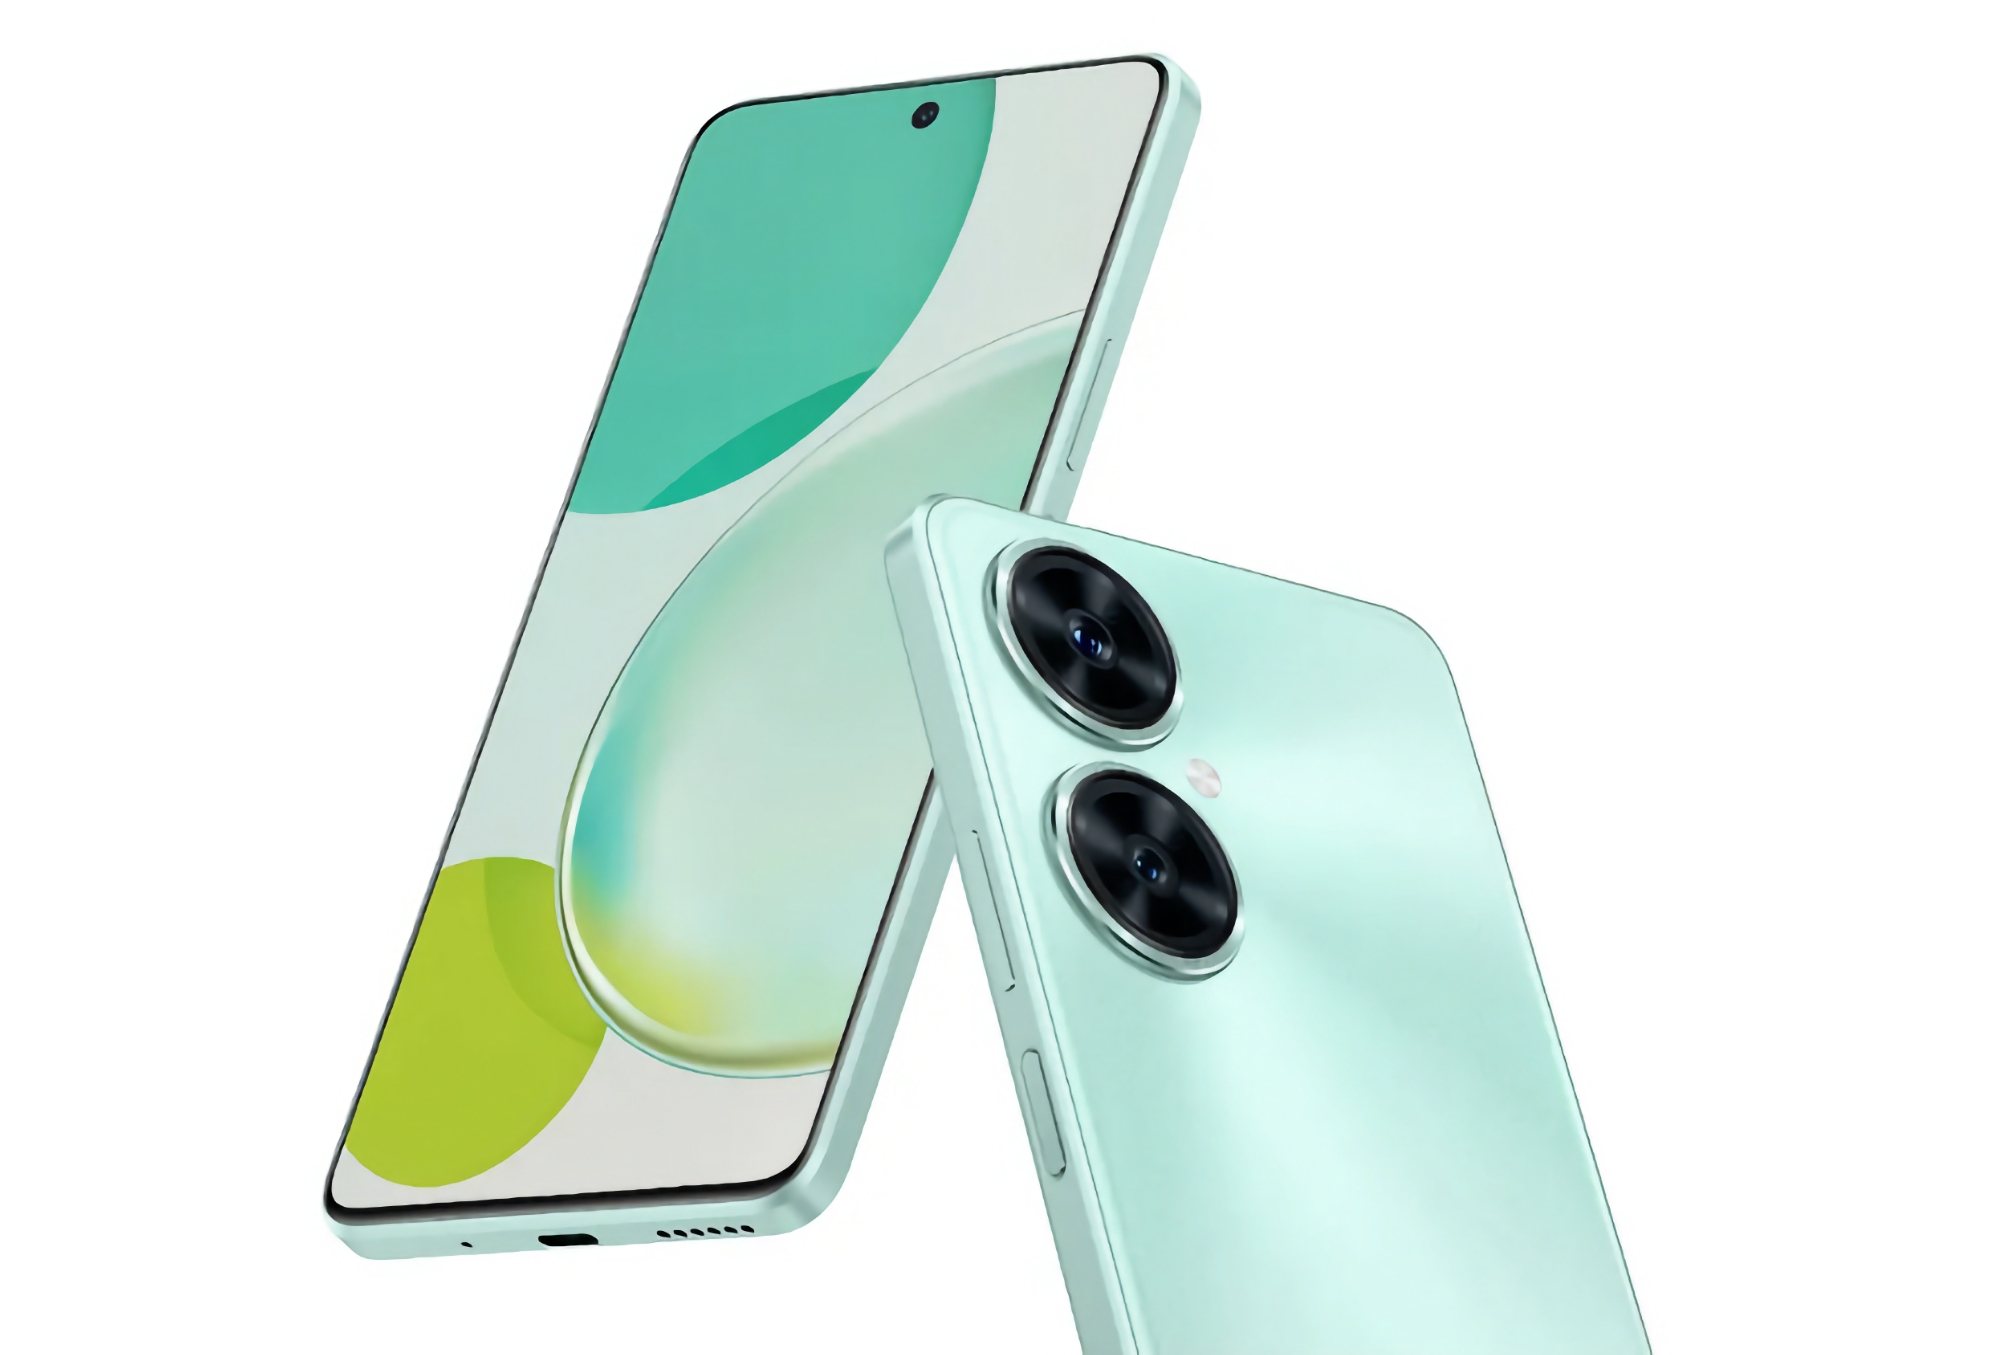 Huawei Nova 11i: 90Hz display, Snapdragon 680 chip, 48 MP dual camera and 5000 mAh battery with 40W charging